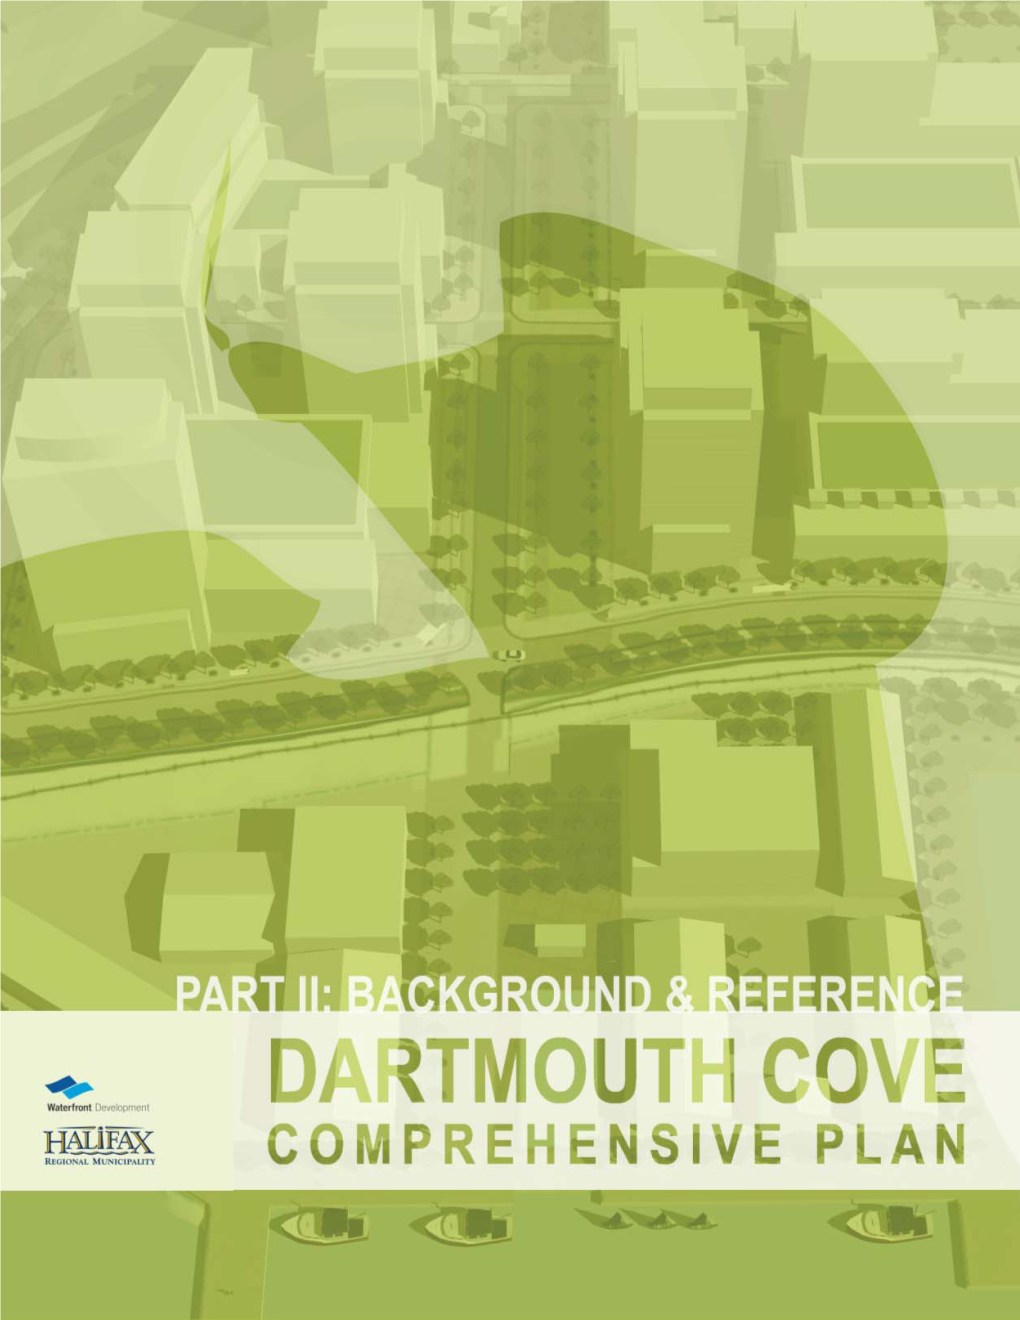 Dartmouth Cove Comprehensive Plan Part II: Background & Reference